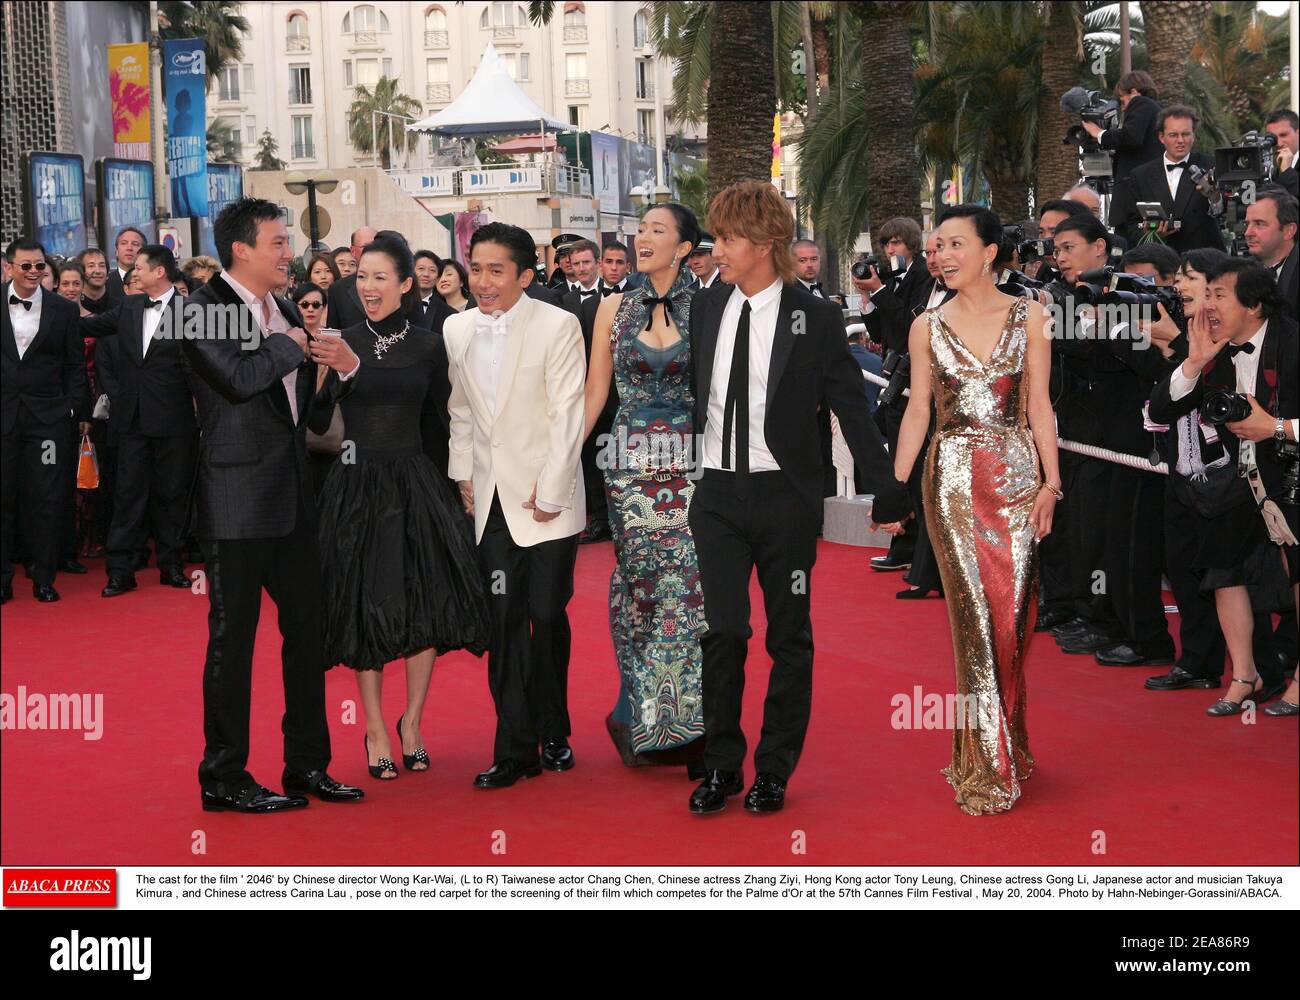 The cast for the film ' 2046' by Chinese director Wong Kar-Wai, (L to R) Taiwanese actor Chang Chen, Chinese actress Zhang Ziyi, Hong Kong actor Tony Leung, Chinese actress Gong Li, Japanese actor and musician Takuya Kimura , and Chinese actress Carina Lau , pose on the red carpet for the screening of their film which competes for the Palme d'Or at the 57th Cannes Film Festival , May 20, 2004. Photo by Hahn-Nebinger-Gorassini/ABACA. Stock Photo